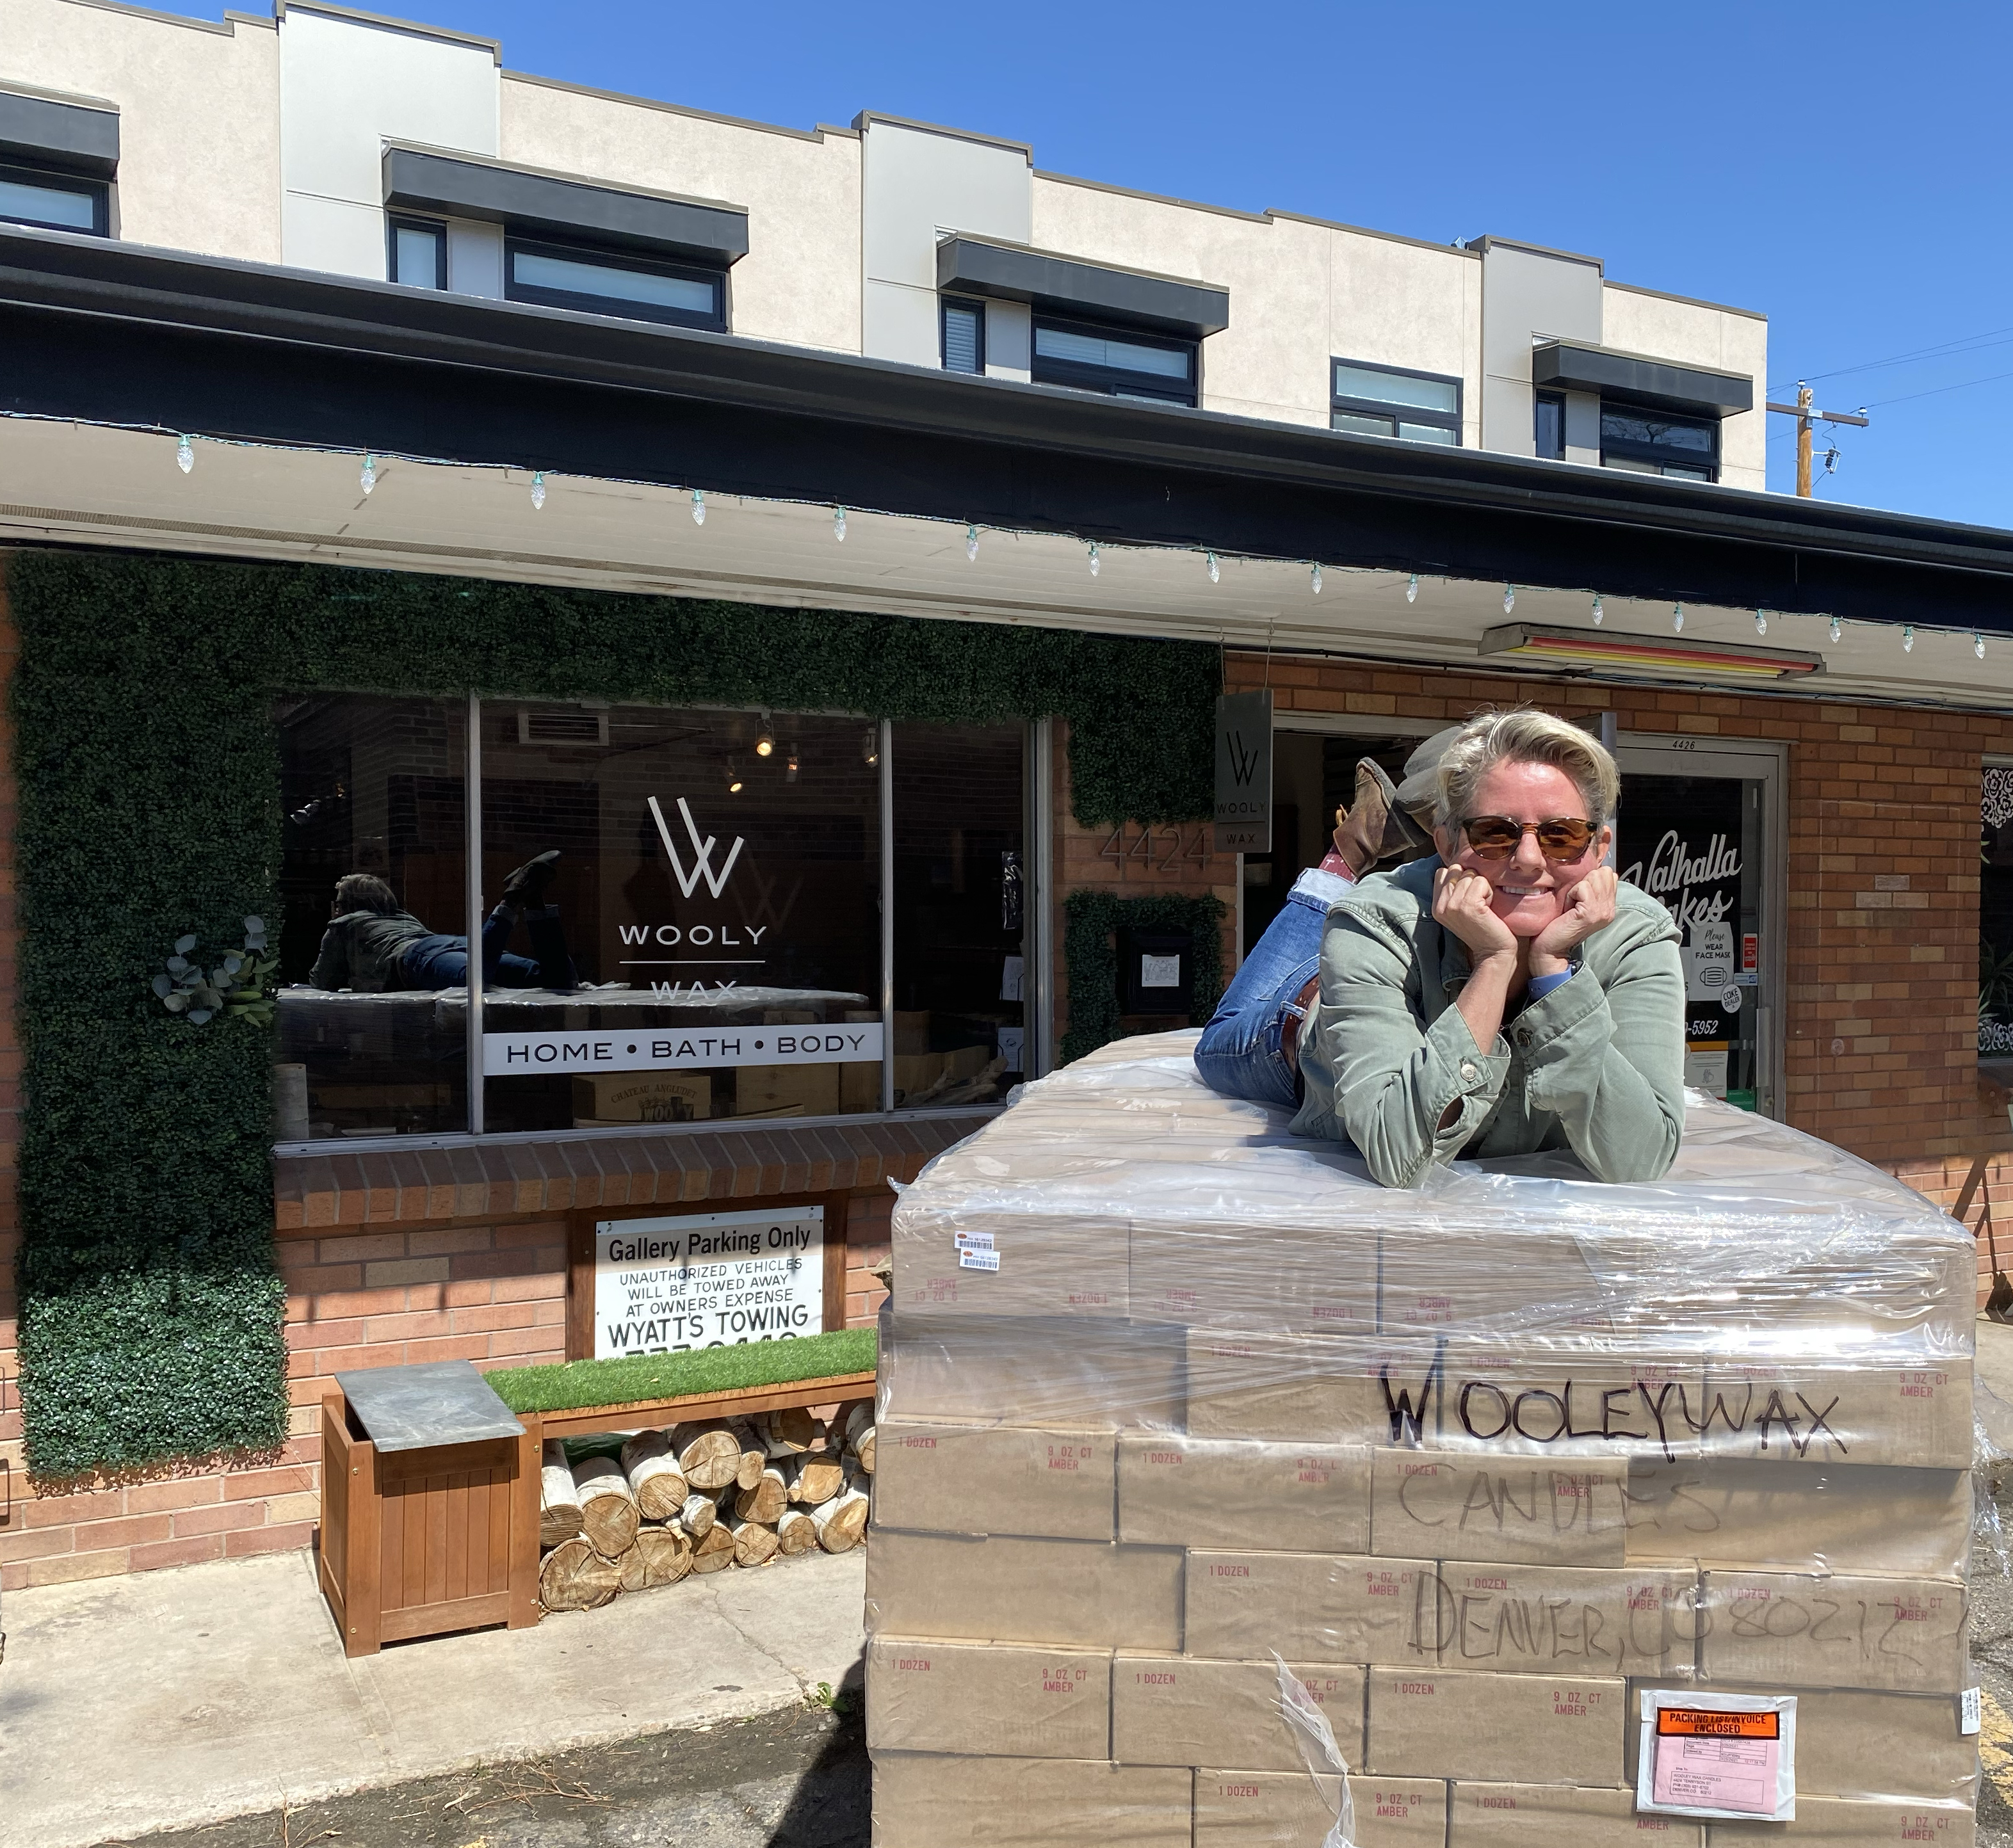 Rachel of Wooly Wax candles laying outside on her stomach on a large and tall stack of boxes outside her storefront. Behind her is a brick building, partially covered in greenery, with the text “Wooly Wax” and “Home, Bath, Body” printed on the window.